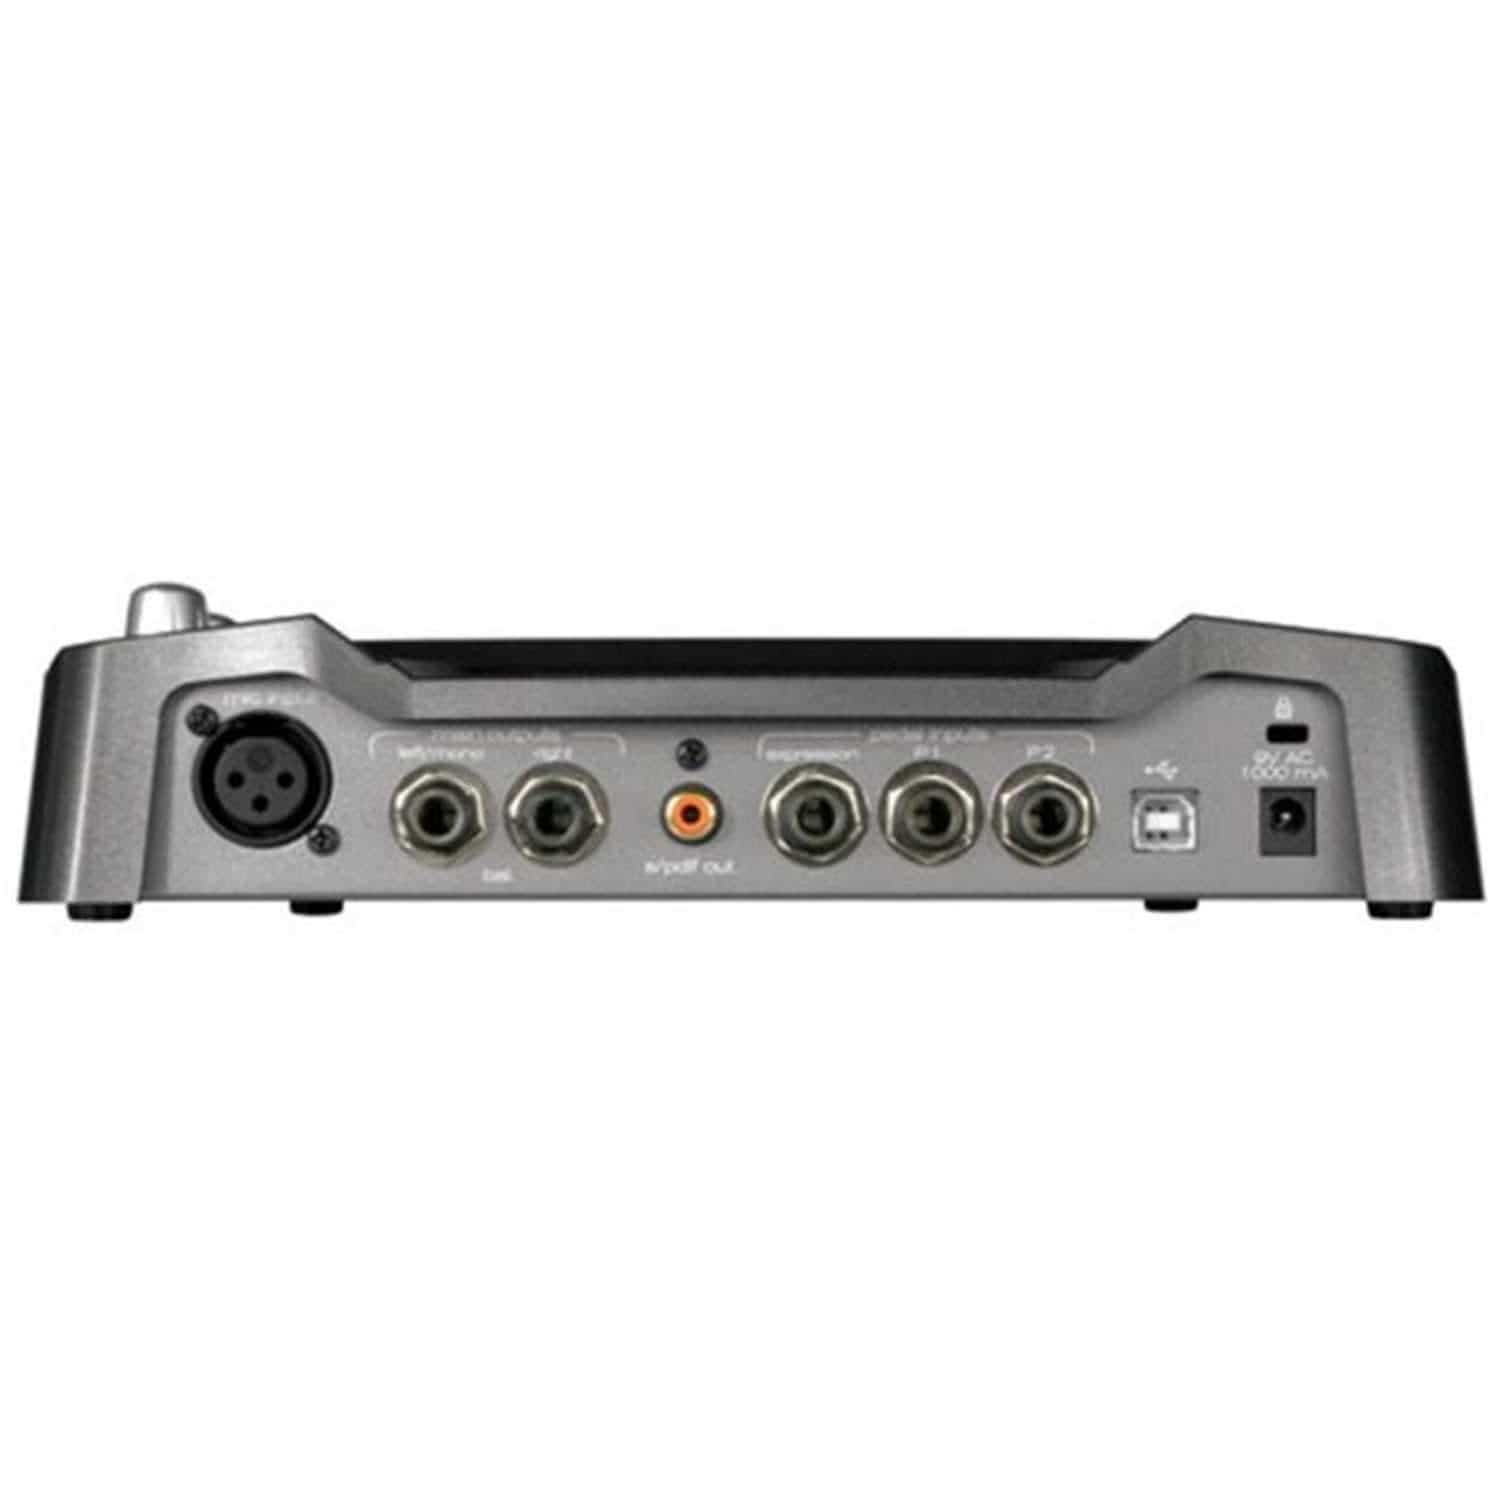 M-Audio BLACK-BOX-RELOADED Gtr USB Audio Interface - ProSound and Stage Lighting